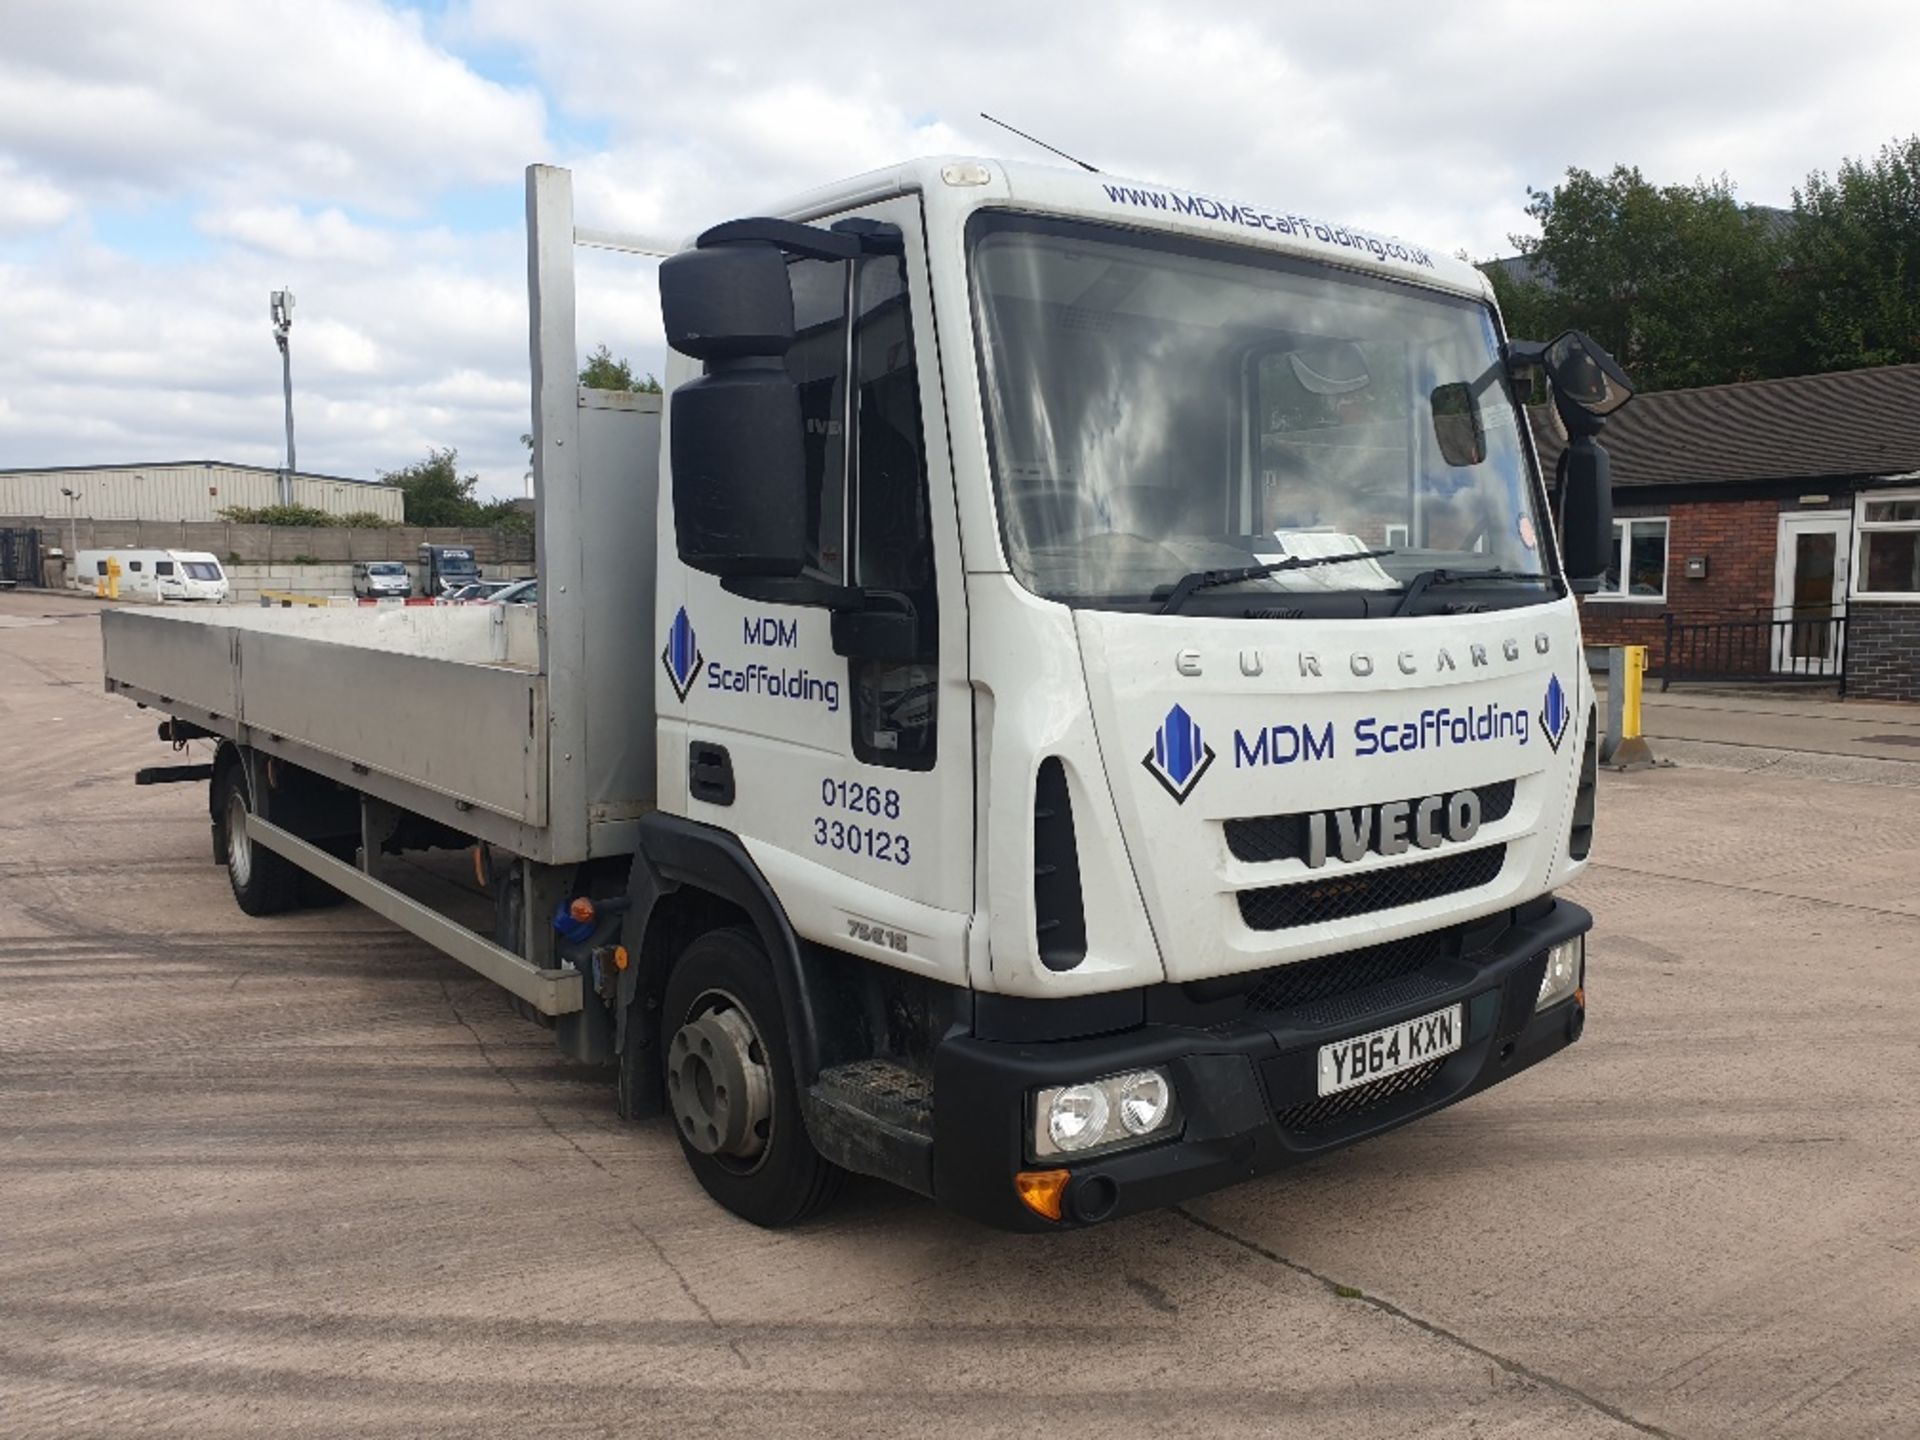 WHITE IVECO EUROCARGO 75E16S S-A. ( DIESEL ) Reg : YB64 KXN, Mileage : 188818 Details: WITH 1 KEY,